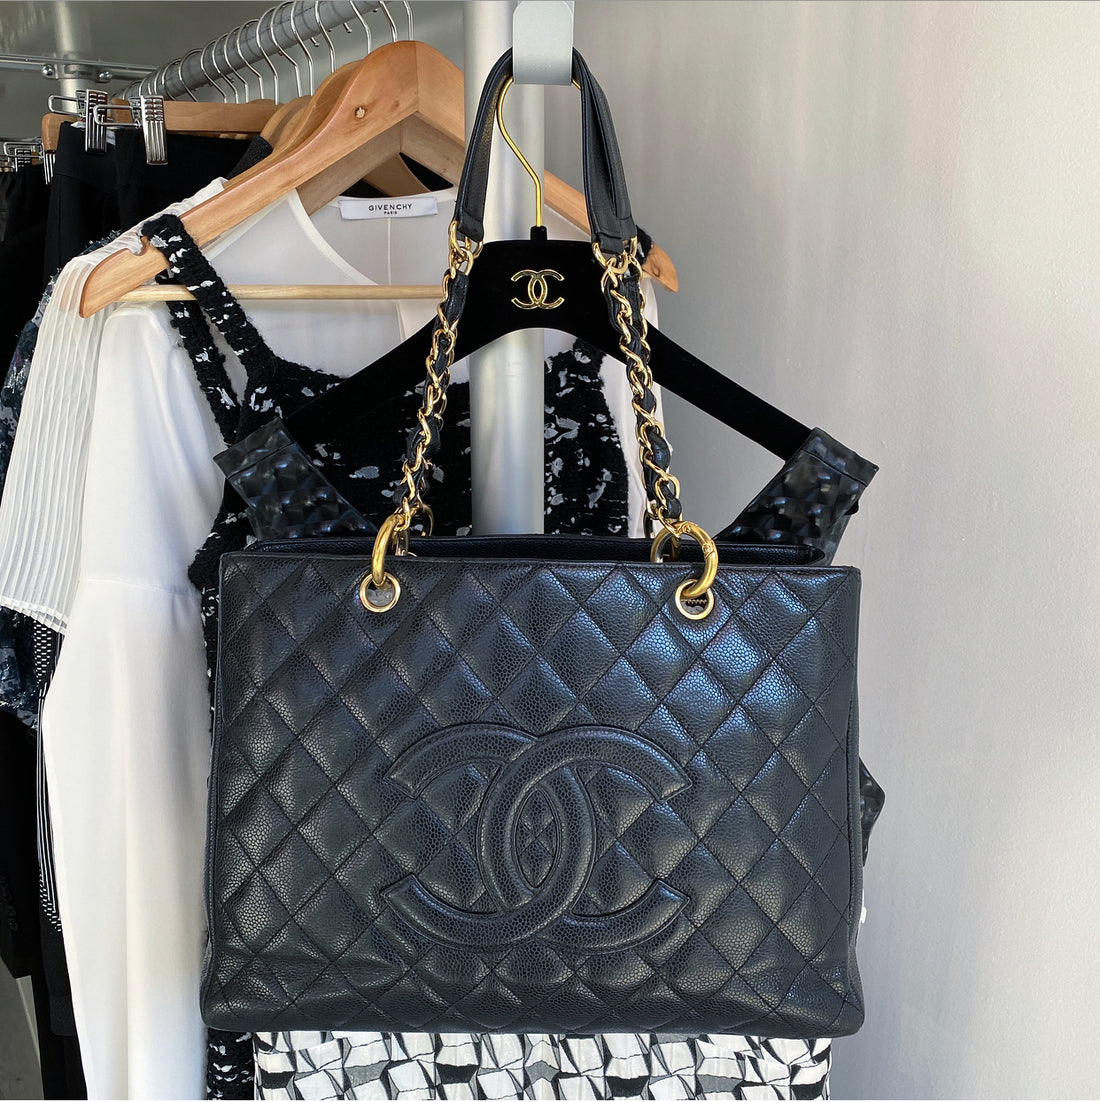 Chanel Black Caviar Leather Grand Shopping tote GST in GHW